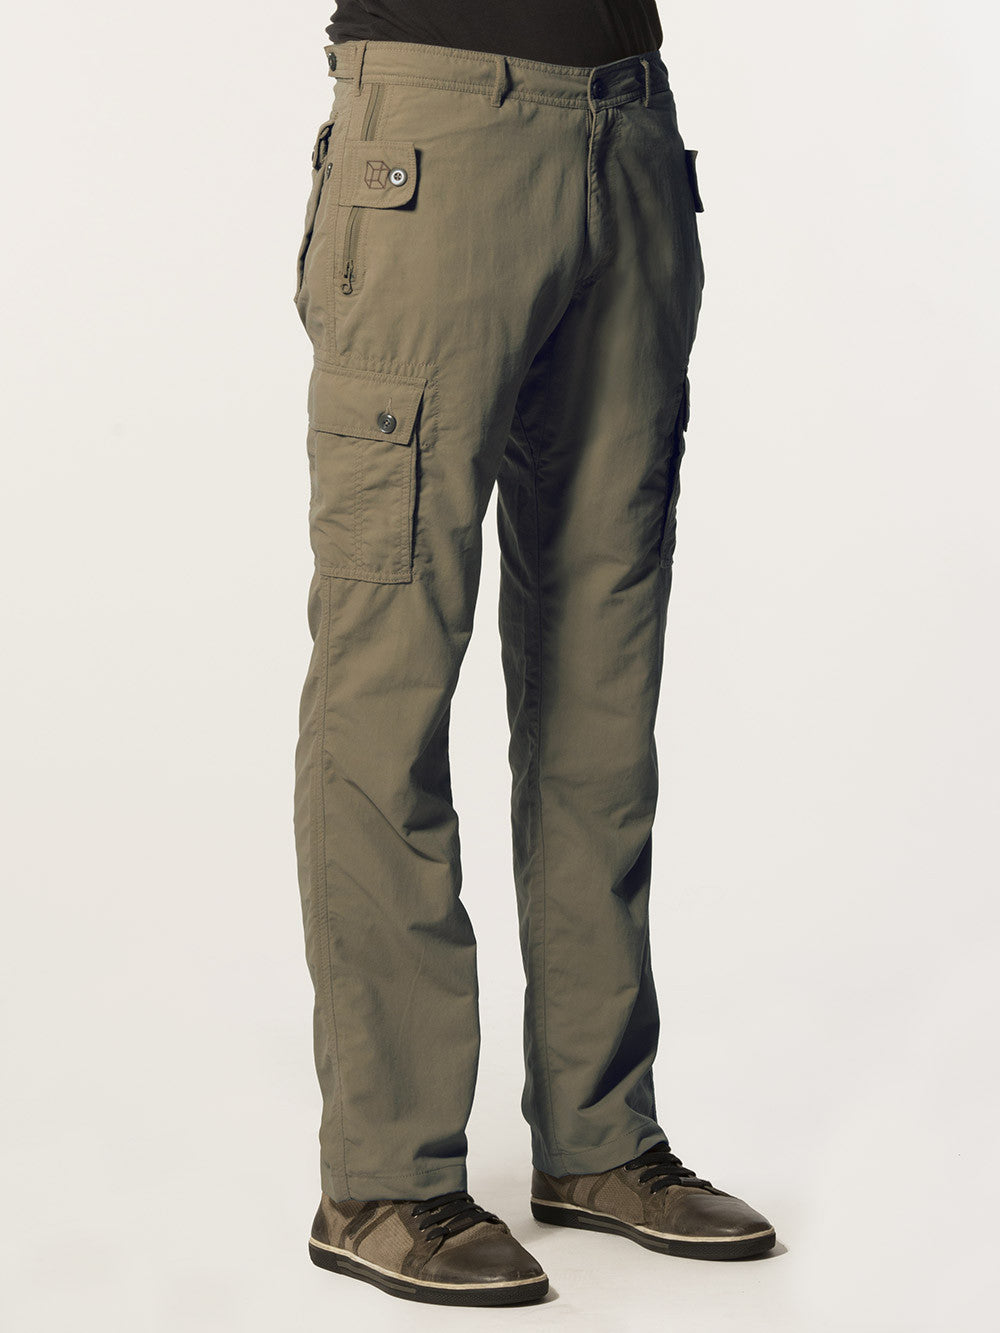 FREESOLDIER FREE SOLDIER Mens Softshell Fleece Lined Cargo Pants India |  Ubuy